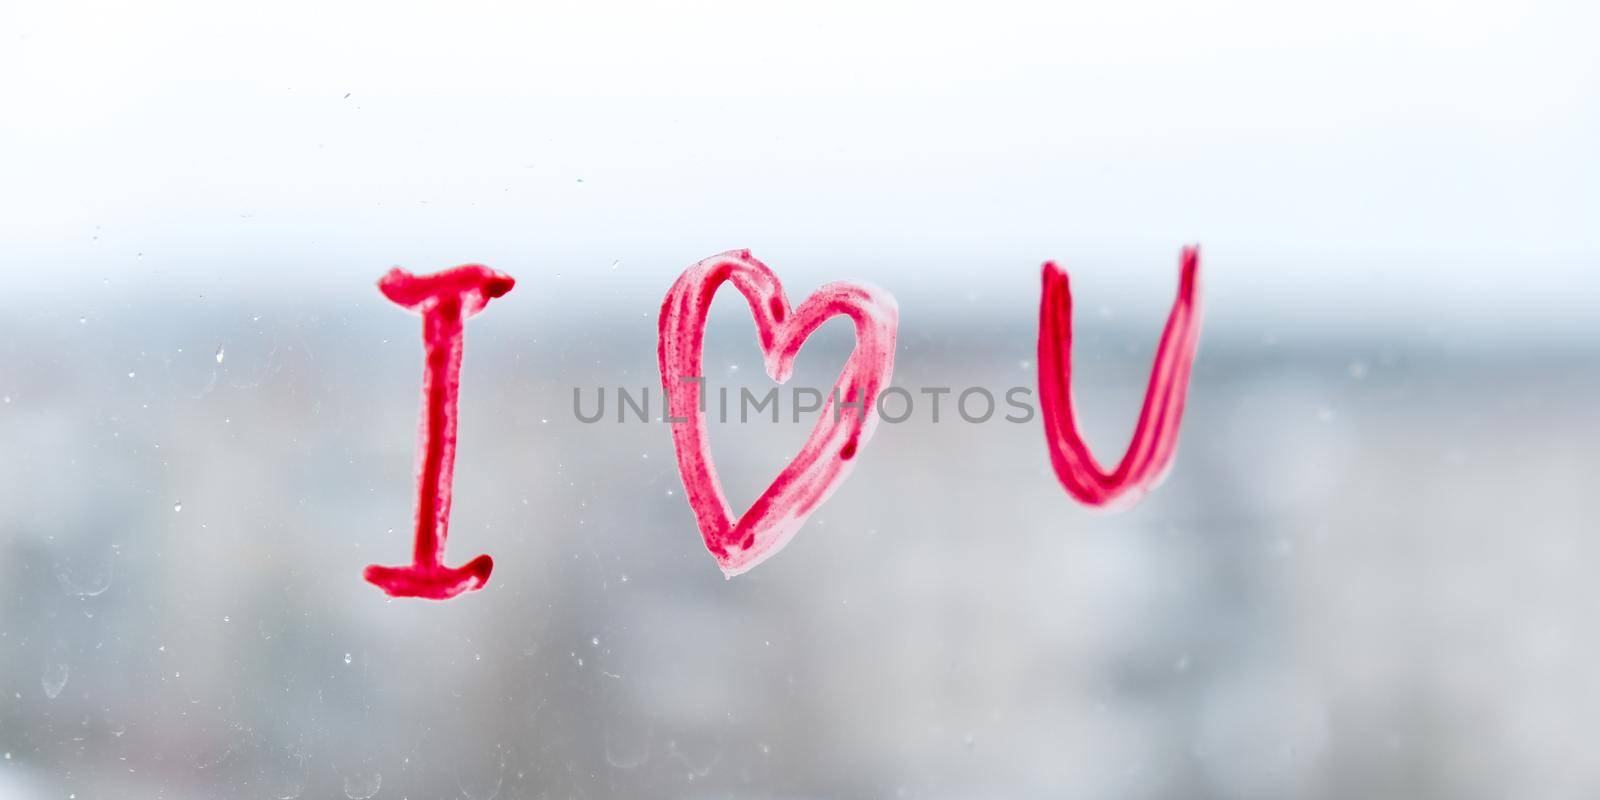 Red heart I LOVE YOU drawn on a window, stay home, quarantine leisure, let's all be well, Valentines day, Love, Romance